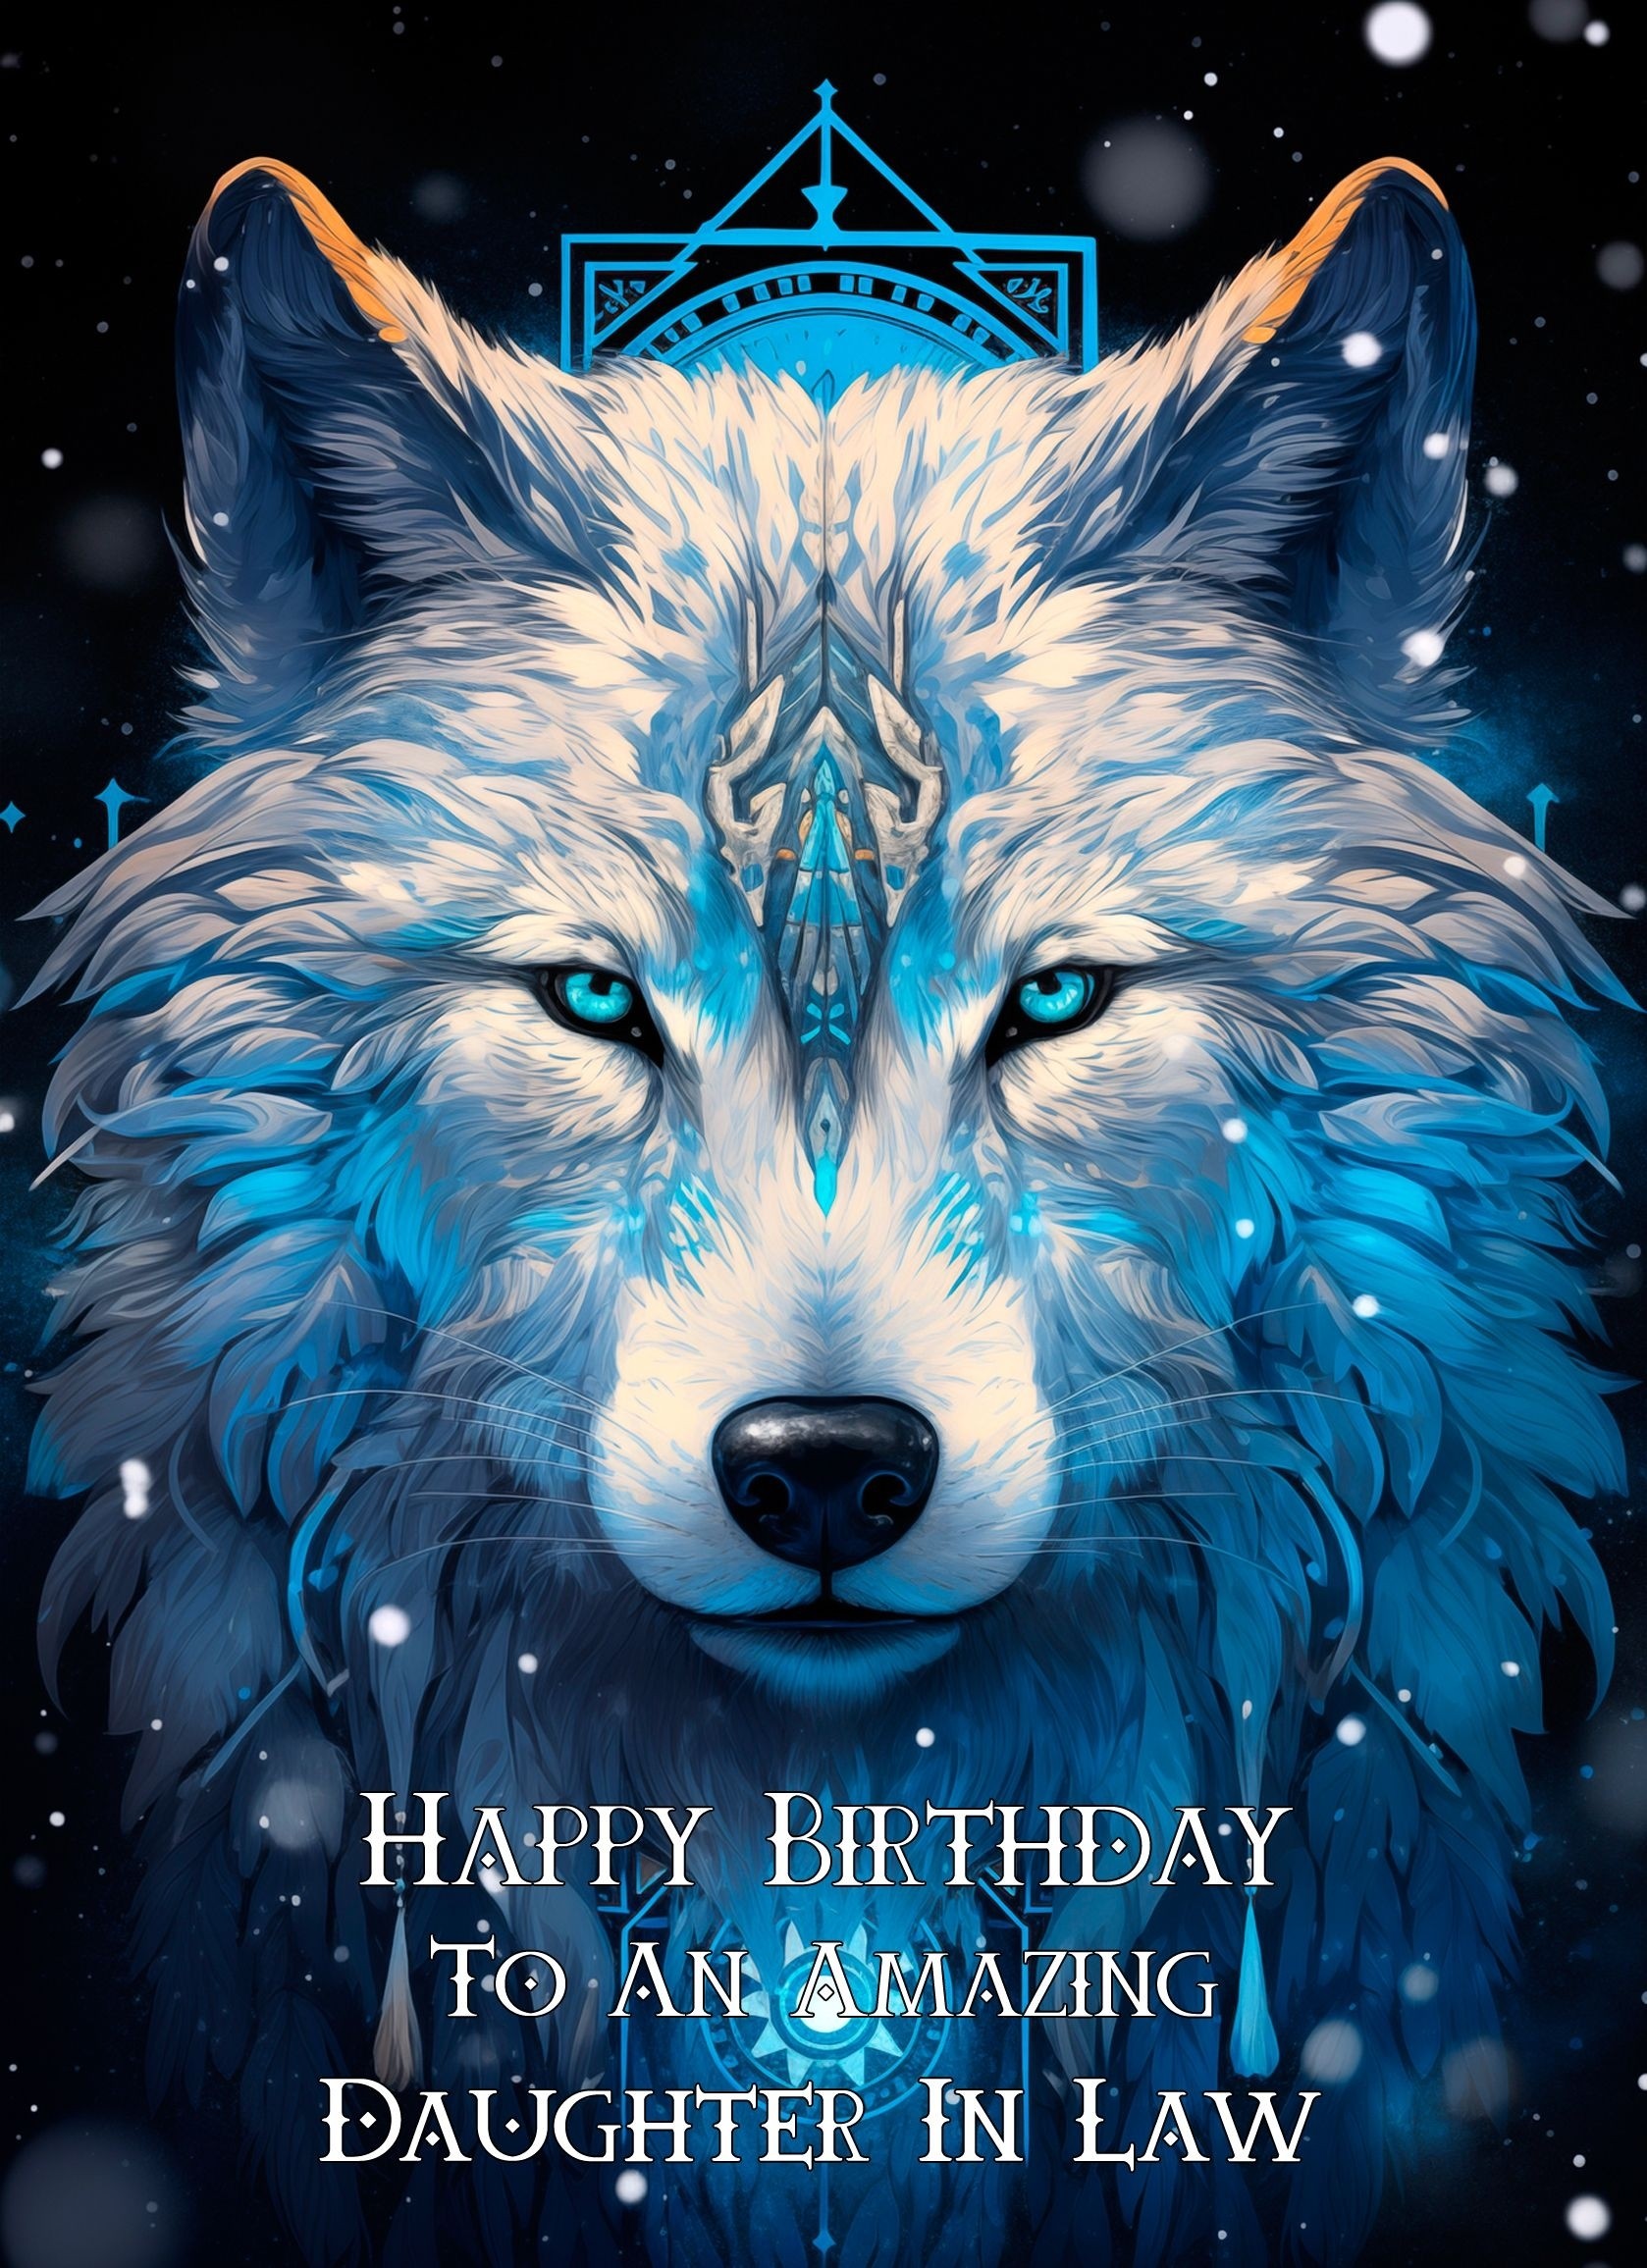 Tribal Wolf Art Birthday Card For Daughter in Law (Design 2)